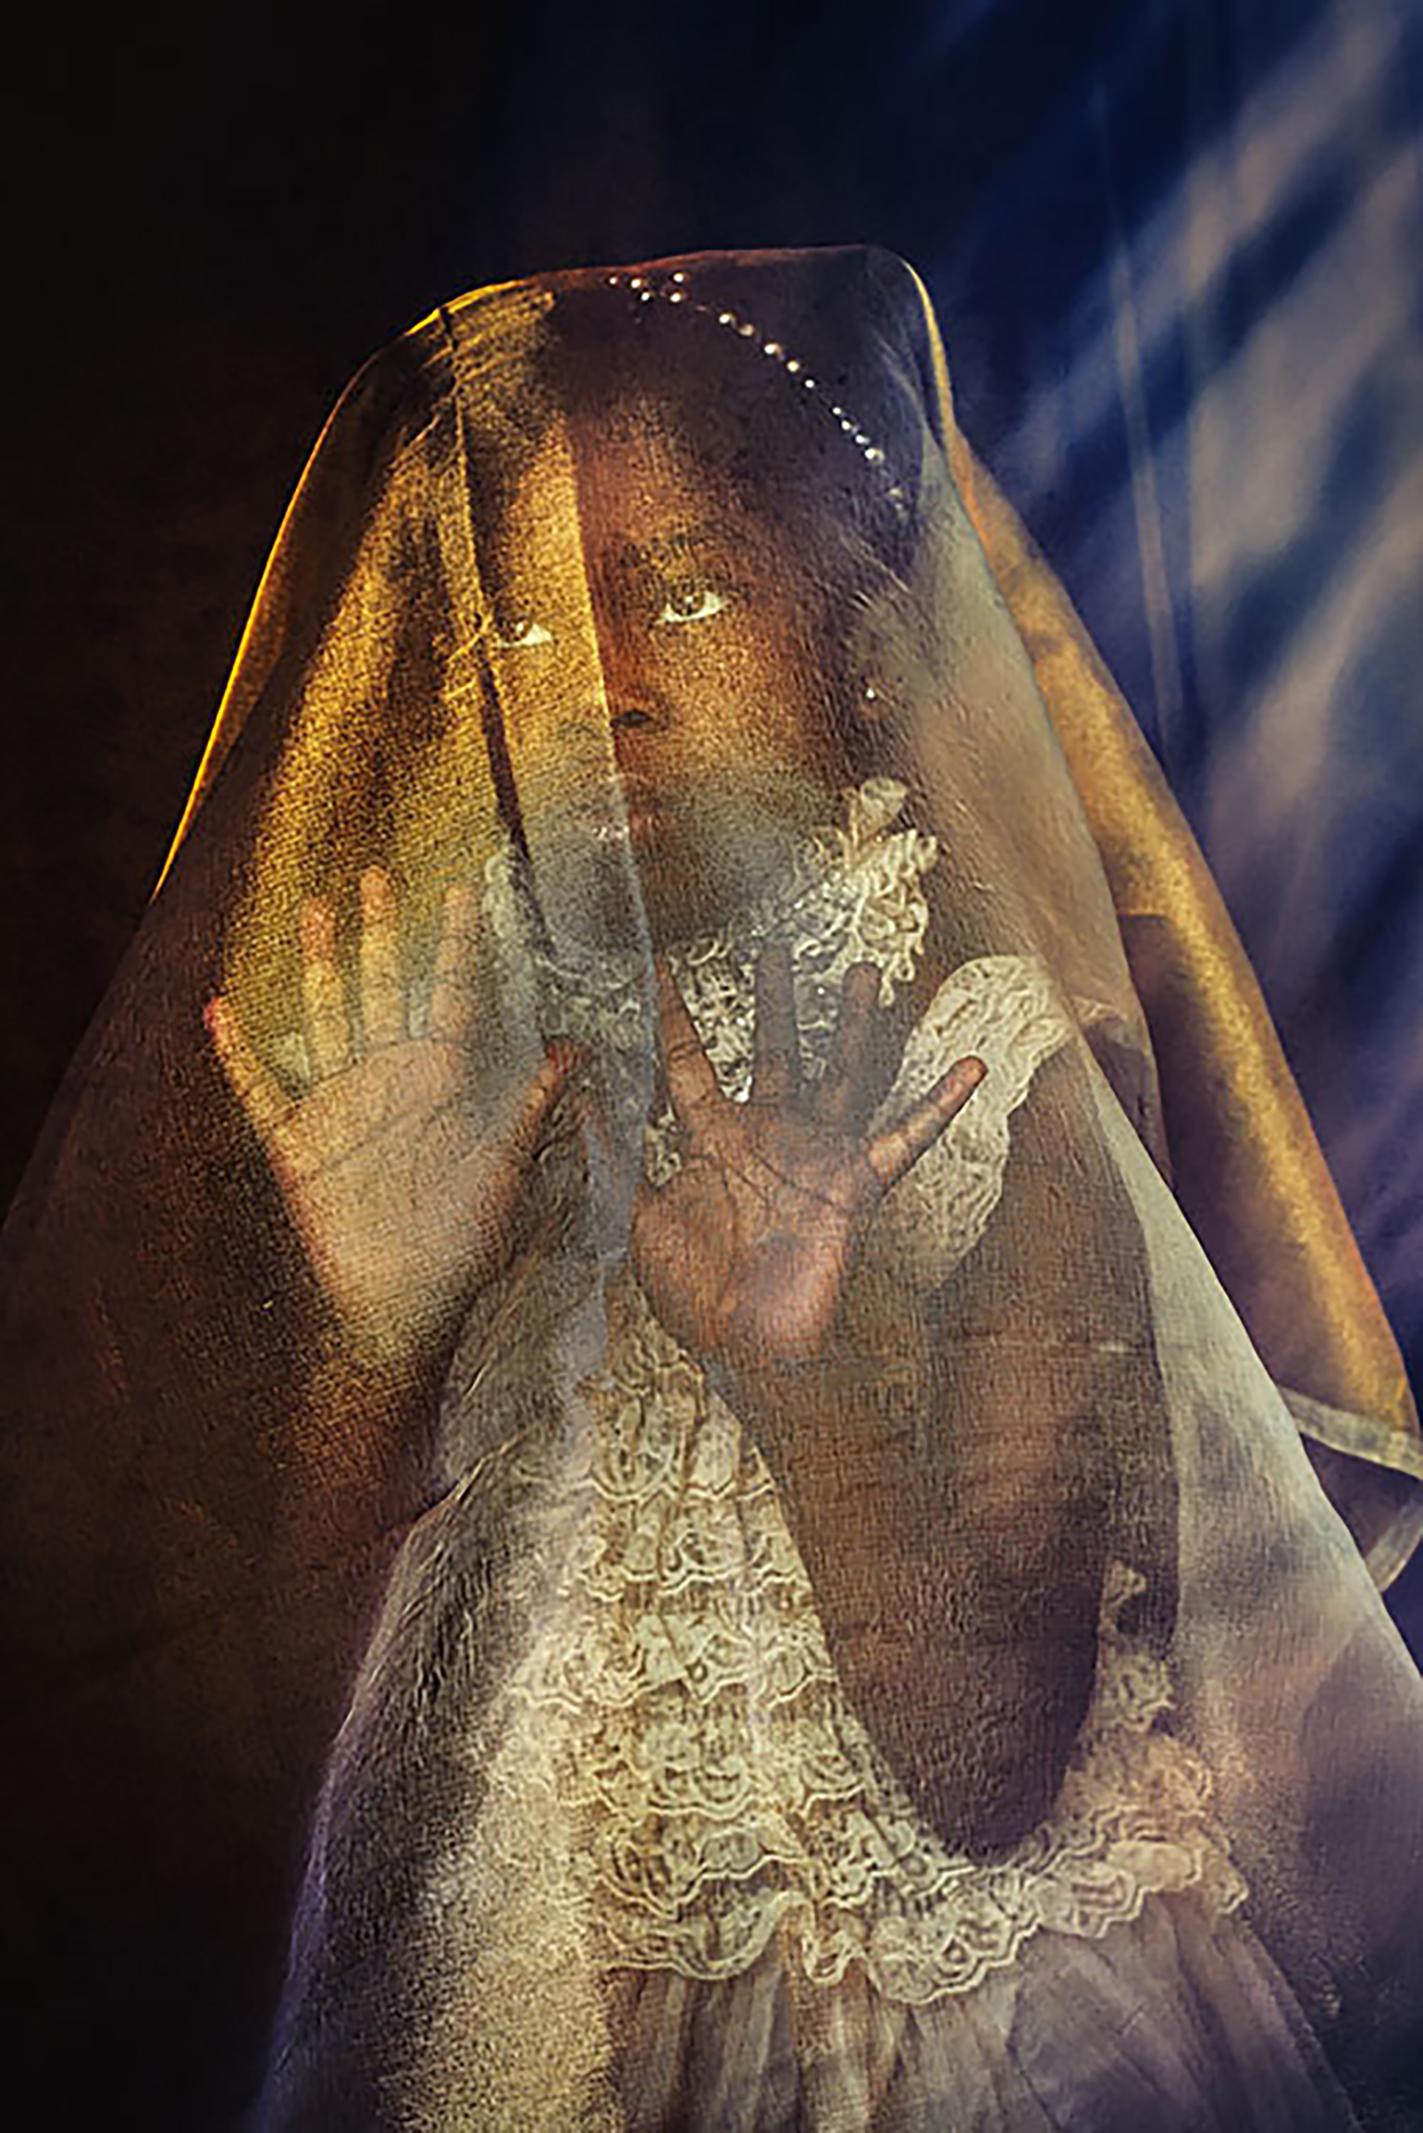  Veiled...Power in Those Hands- Stunning Photograph of Creole Girl in Black Gold